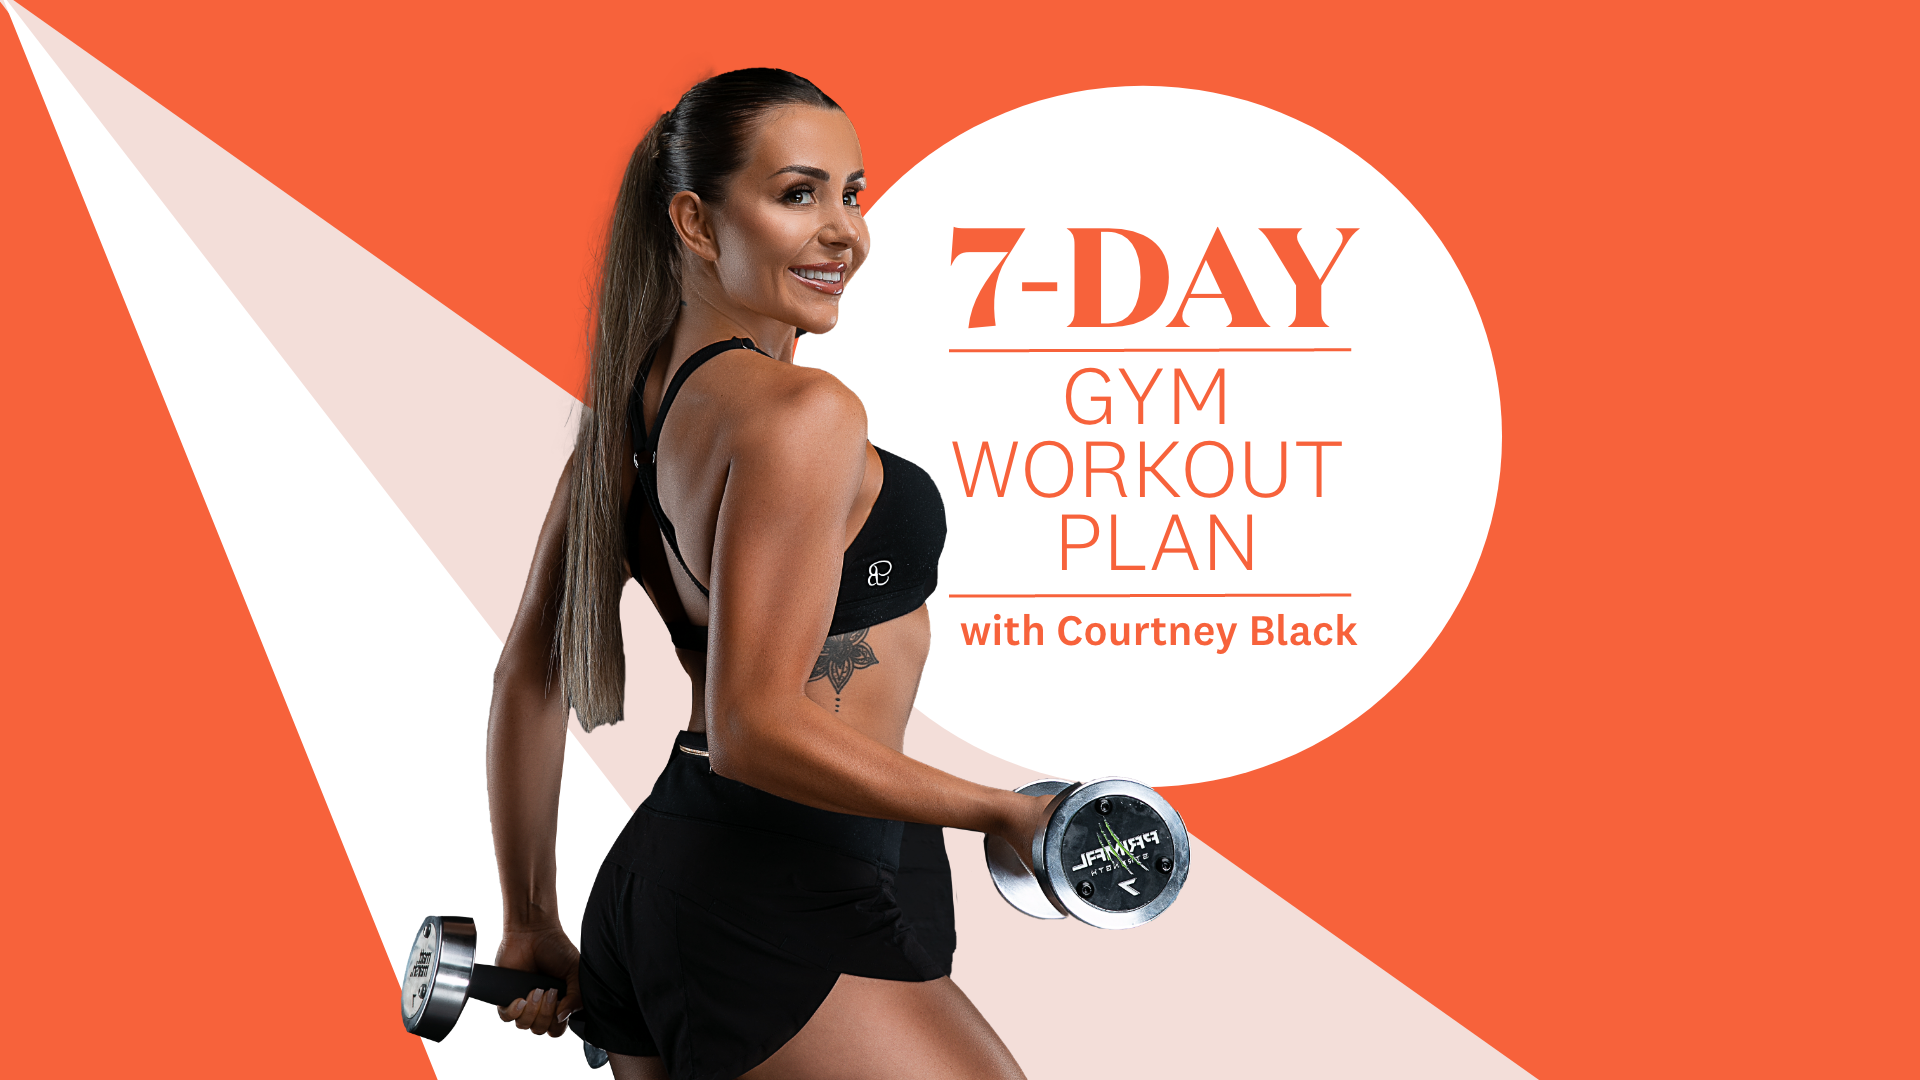 kroeg band Beyond Courtney Black gym workout: A 7-day plan for all levels